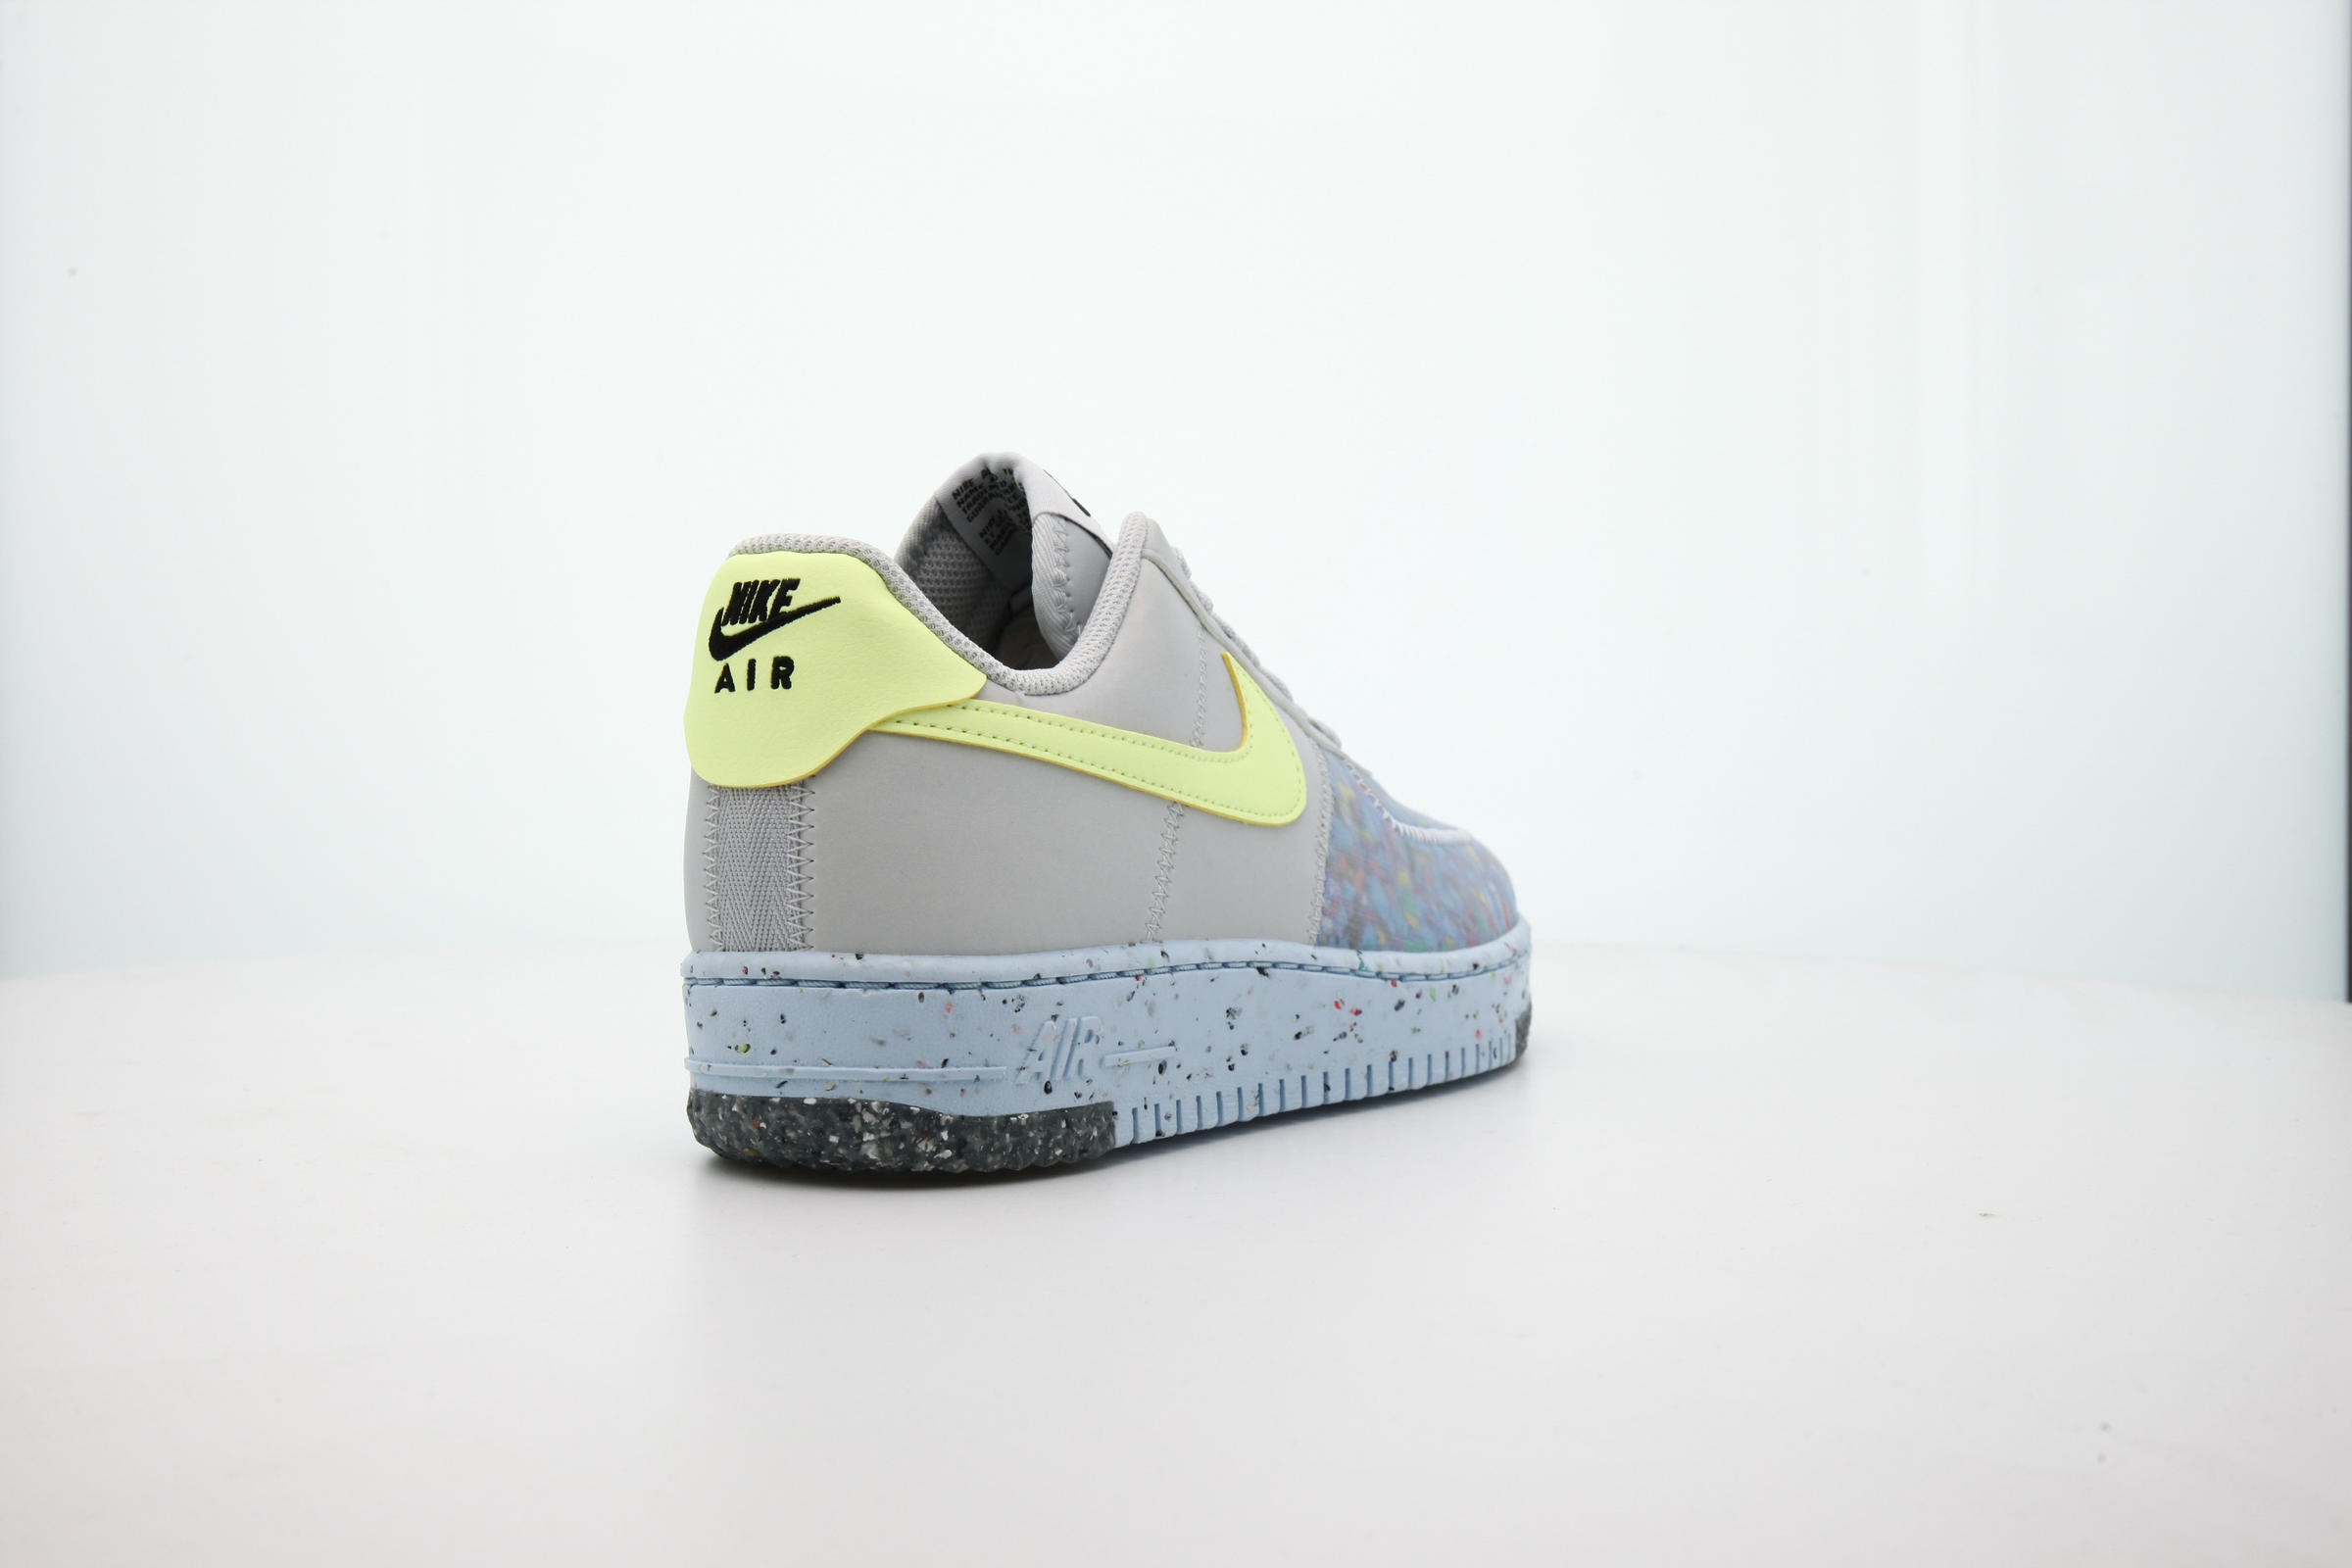 Nike WMNS AIR FORCE 1 CRATER "PURE PLATINUM"